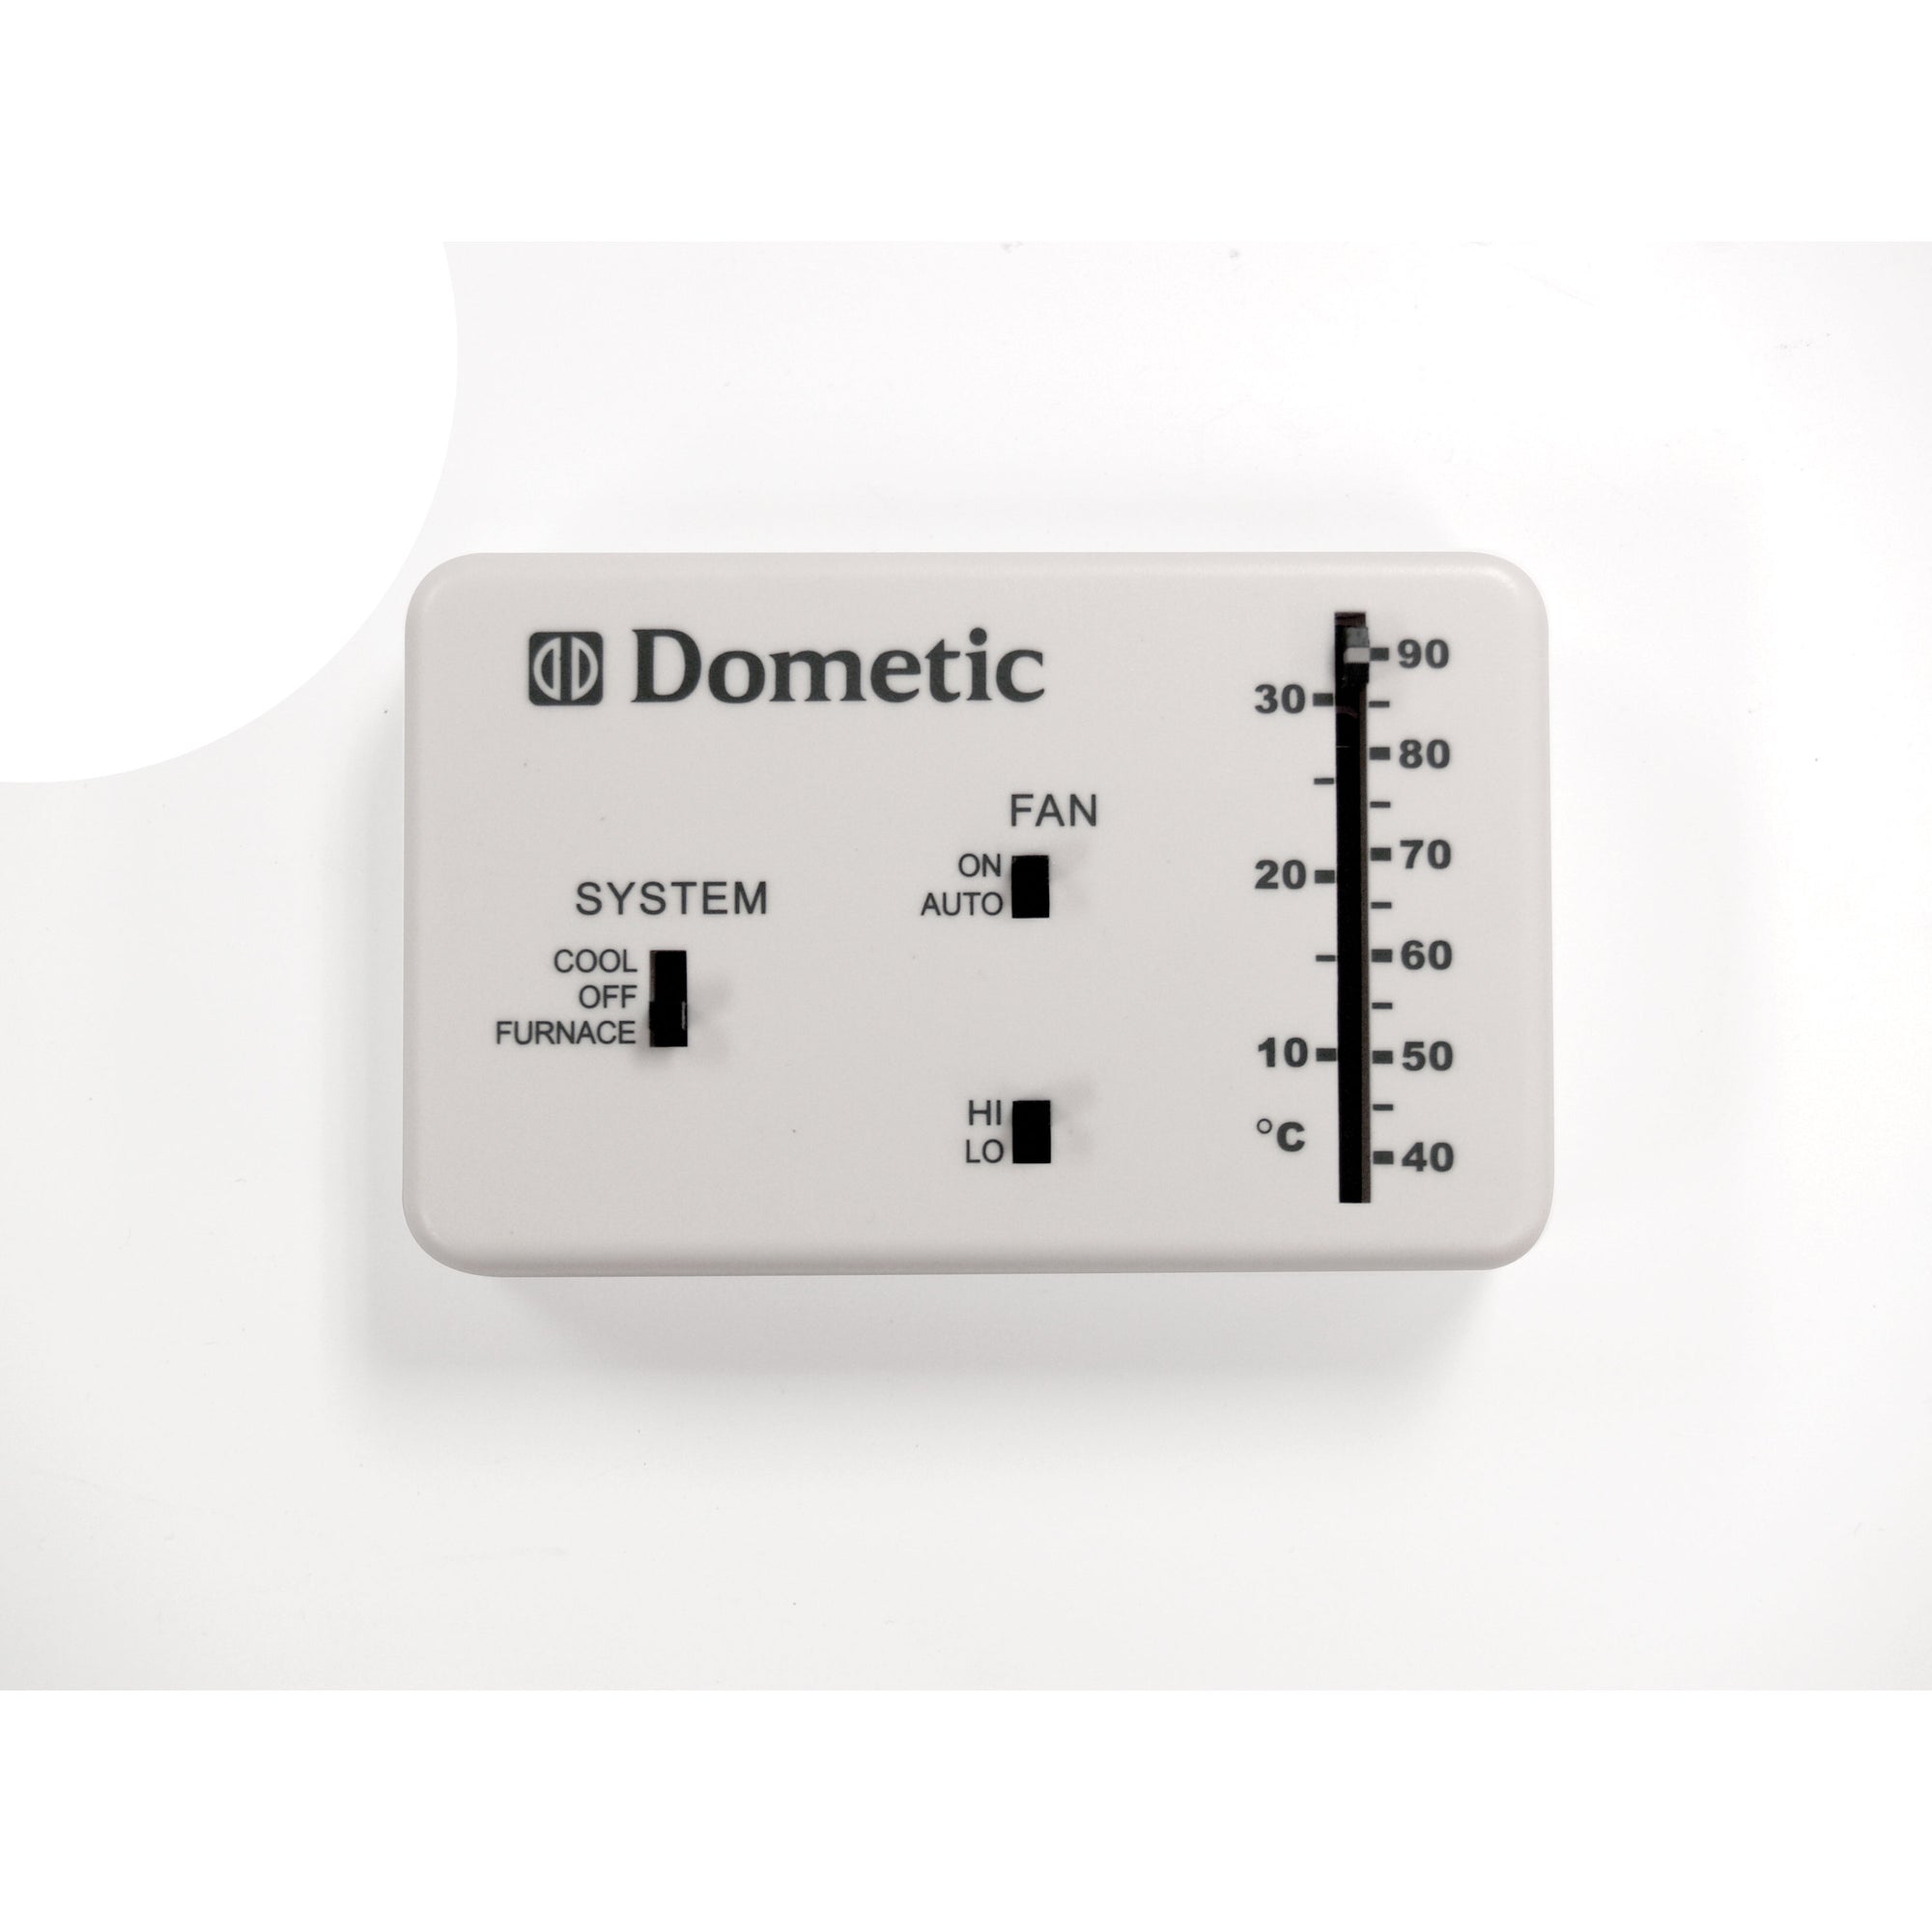 Dometic 3106995.032 Analog Wall Thermostat Only - Polar White